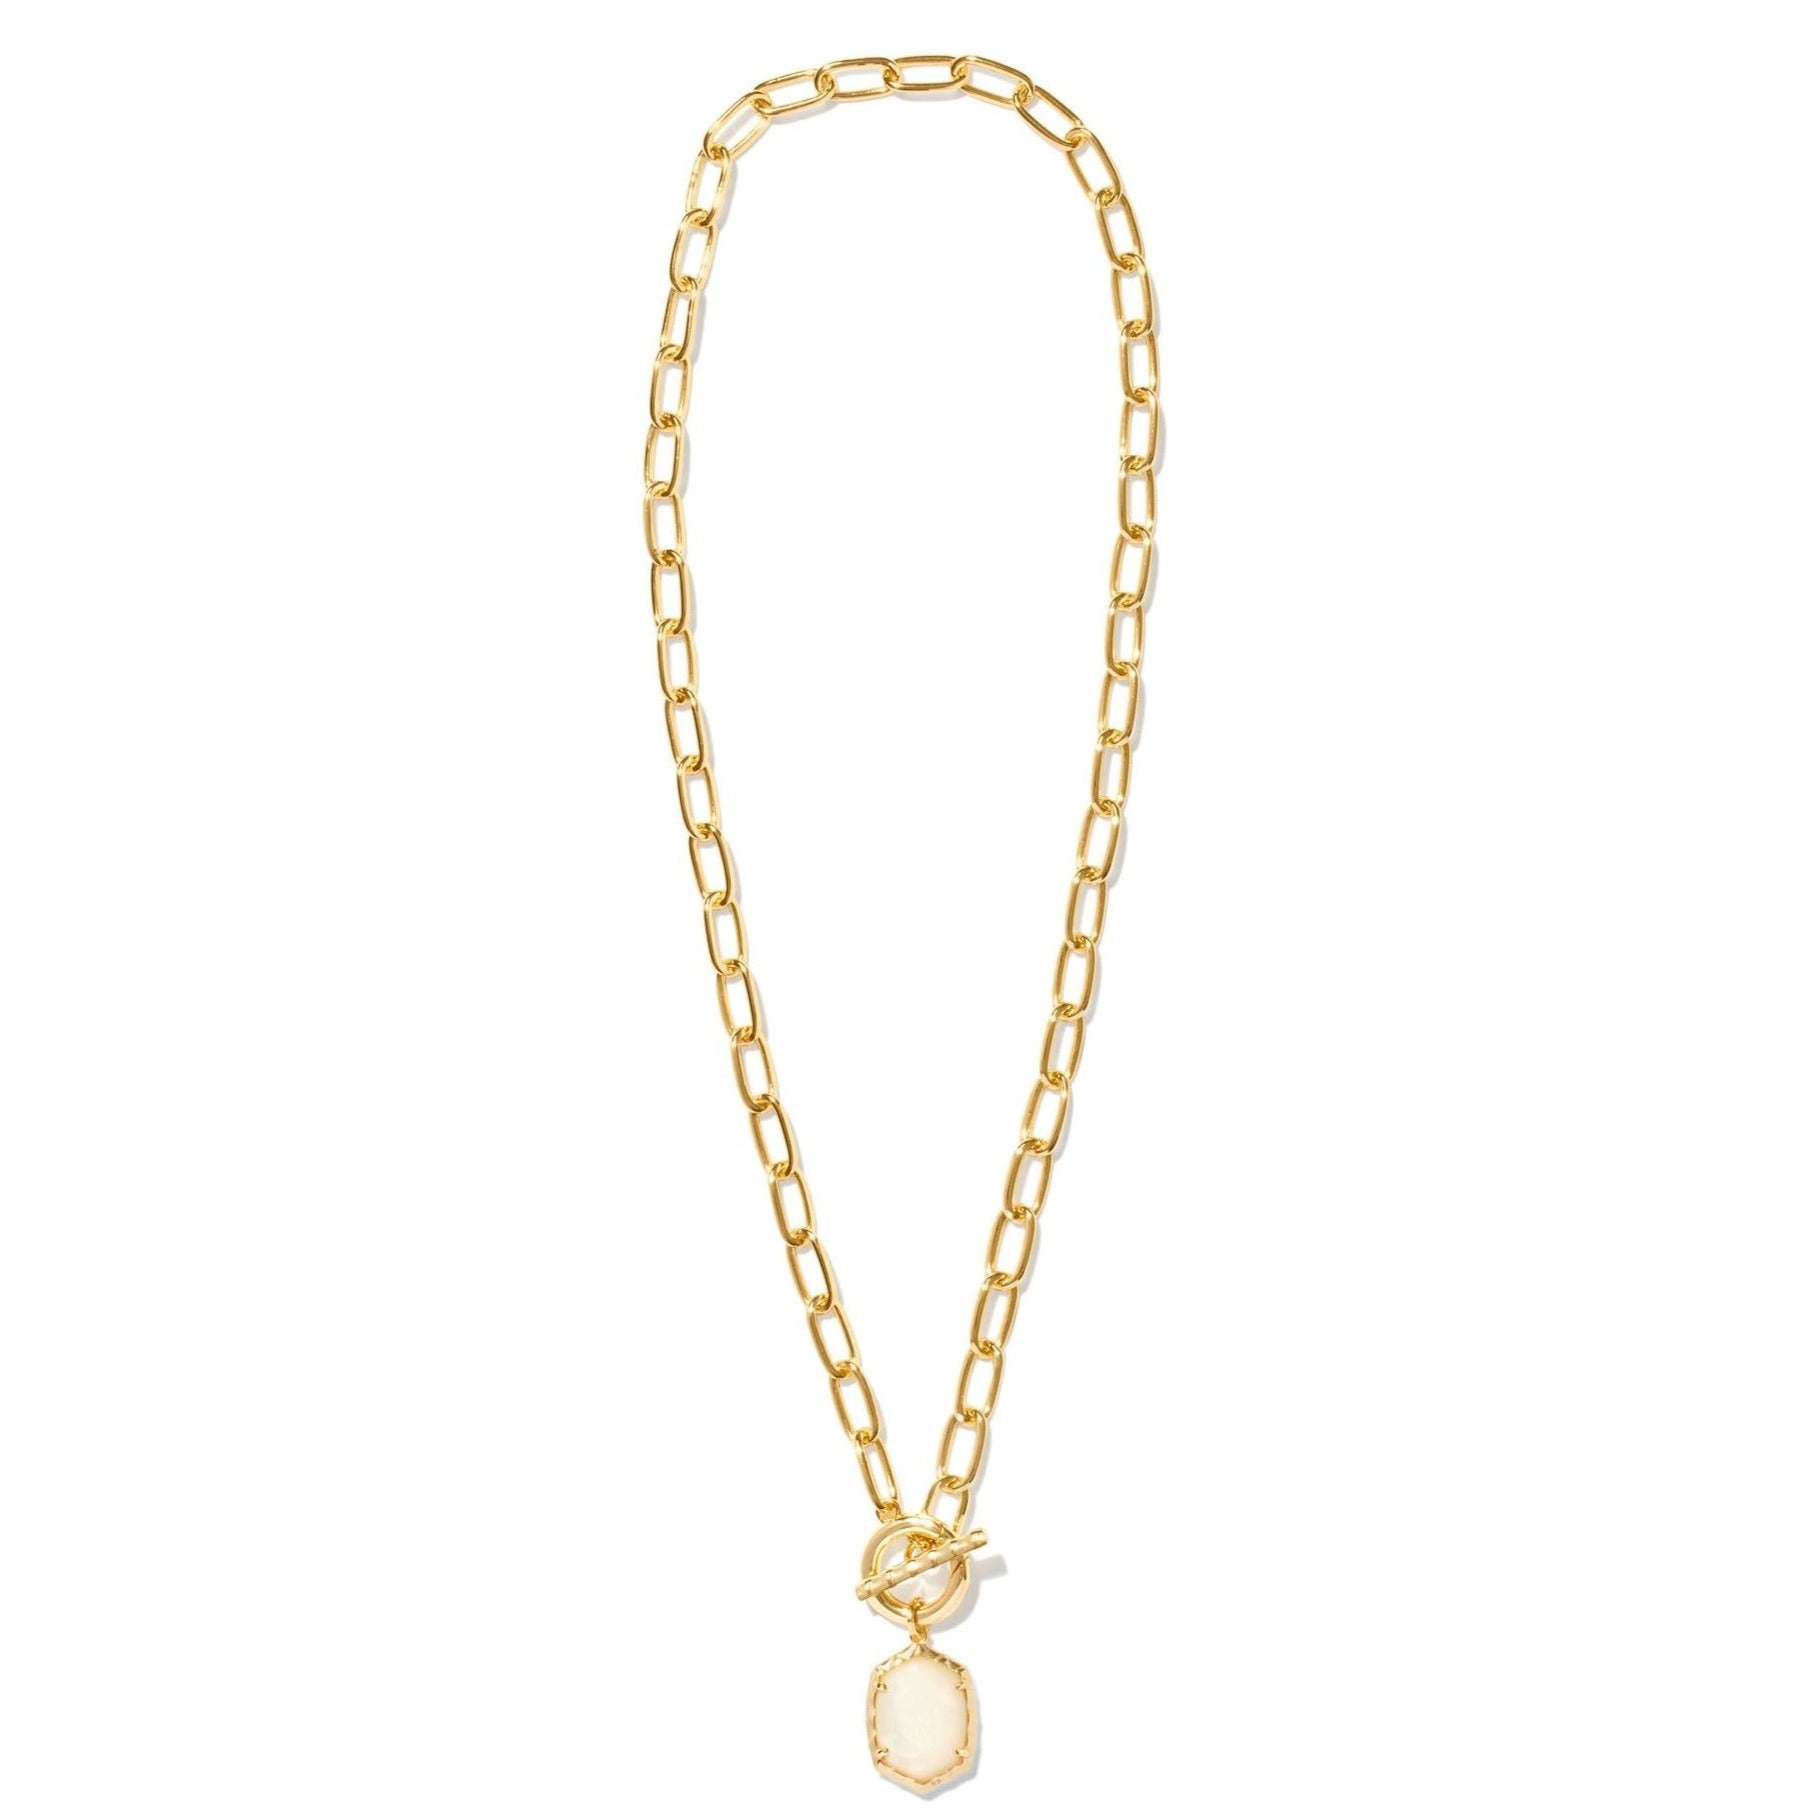 Kendra Scott | Daphne Gold Link and Chain Necklace in Ivory Mother of Pearl - Giddy Up Glamour Boutique